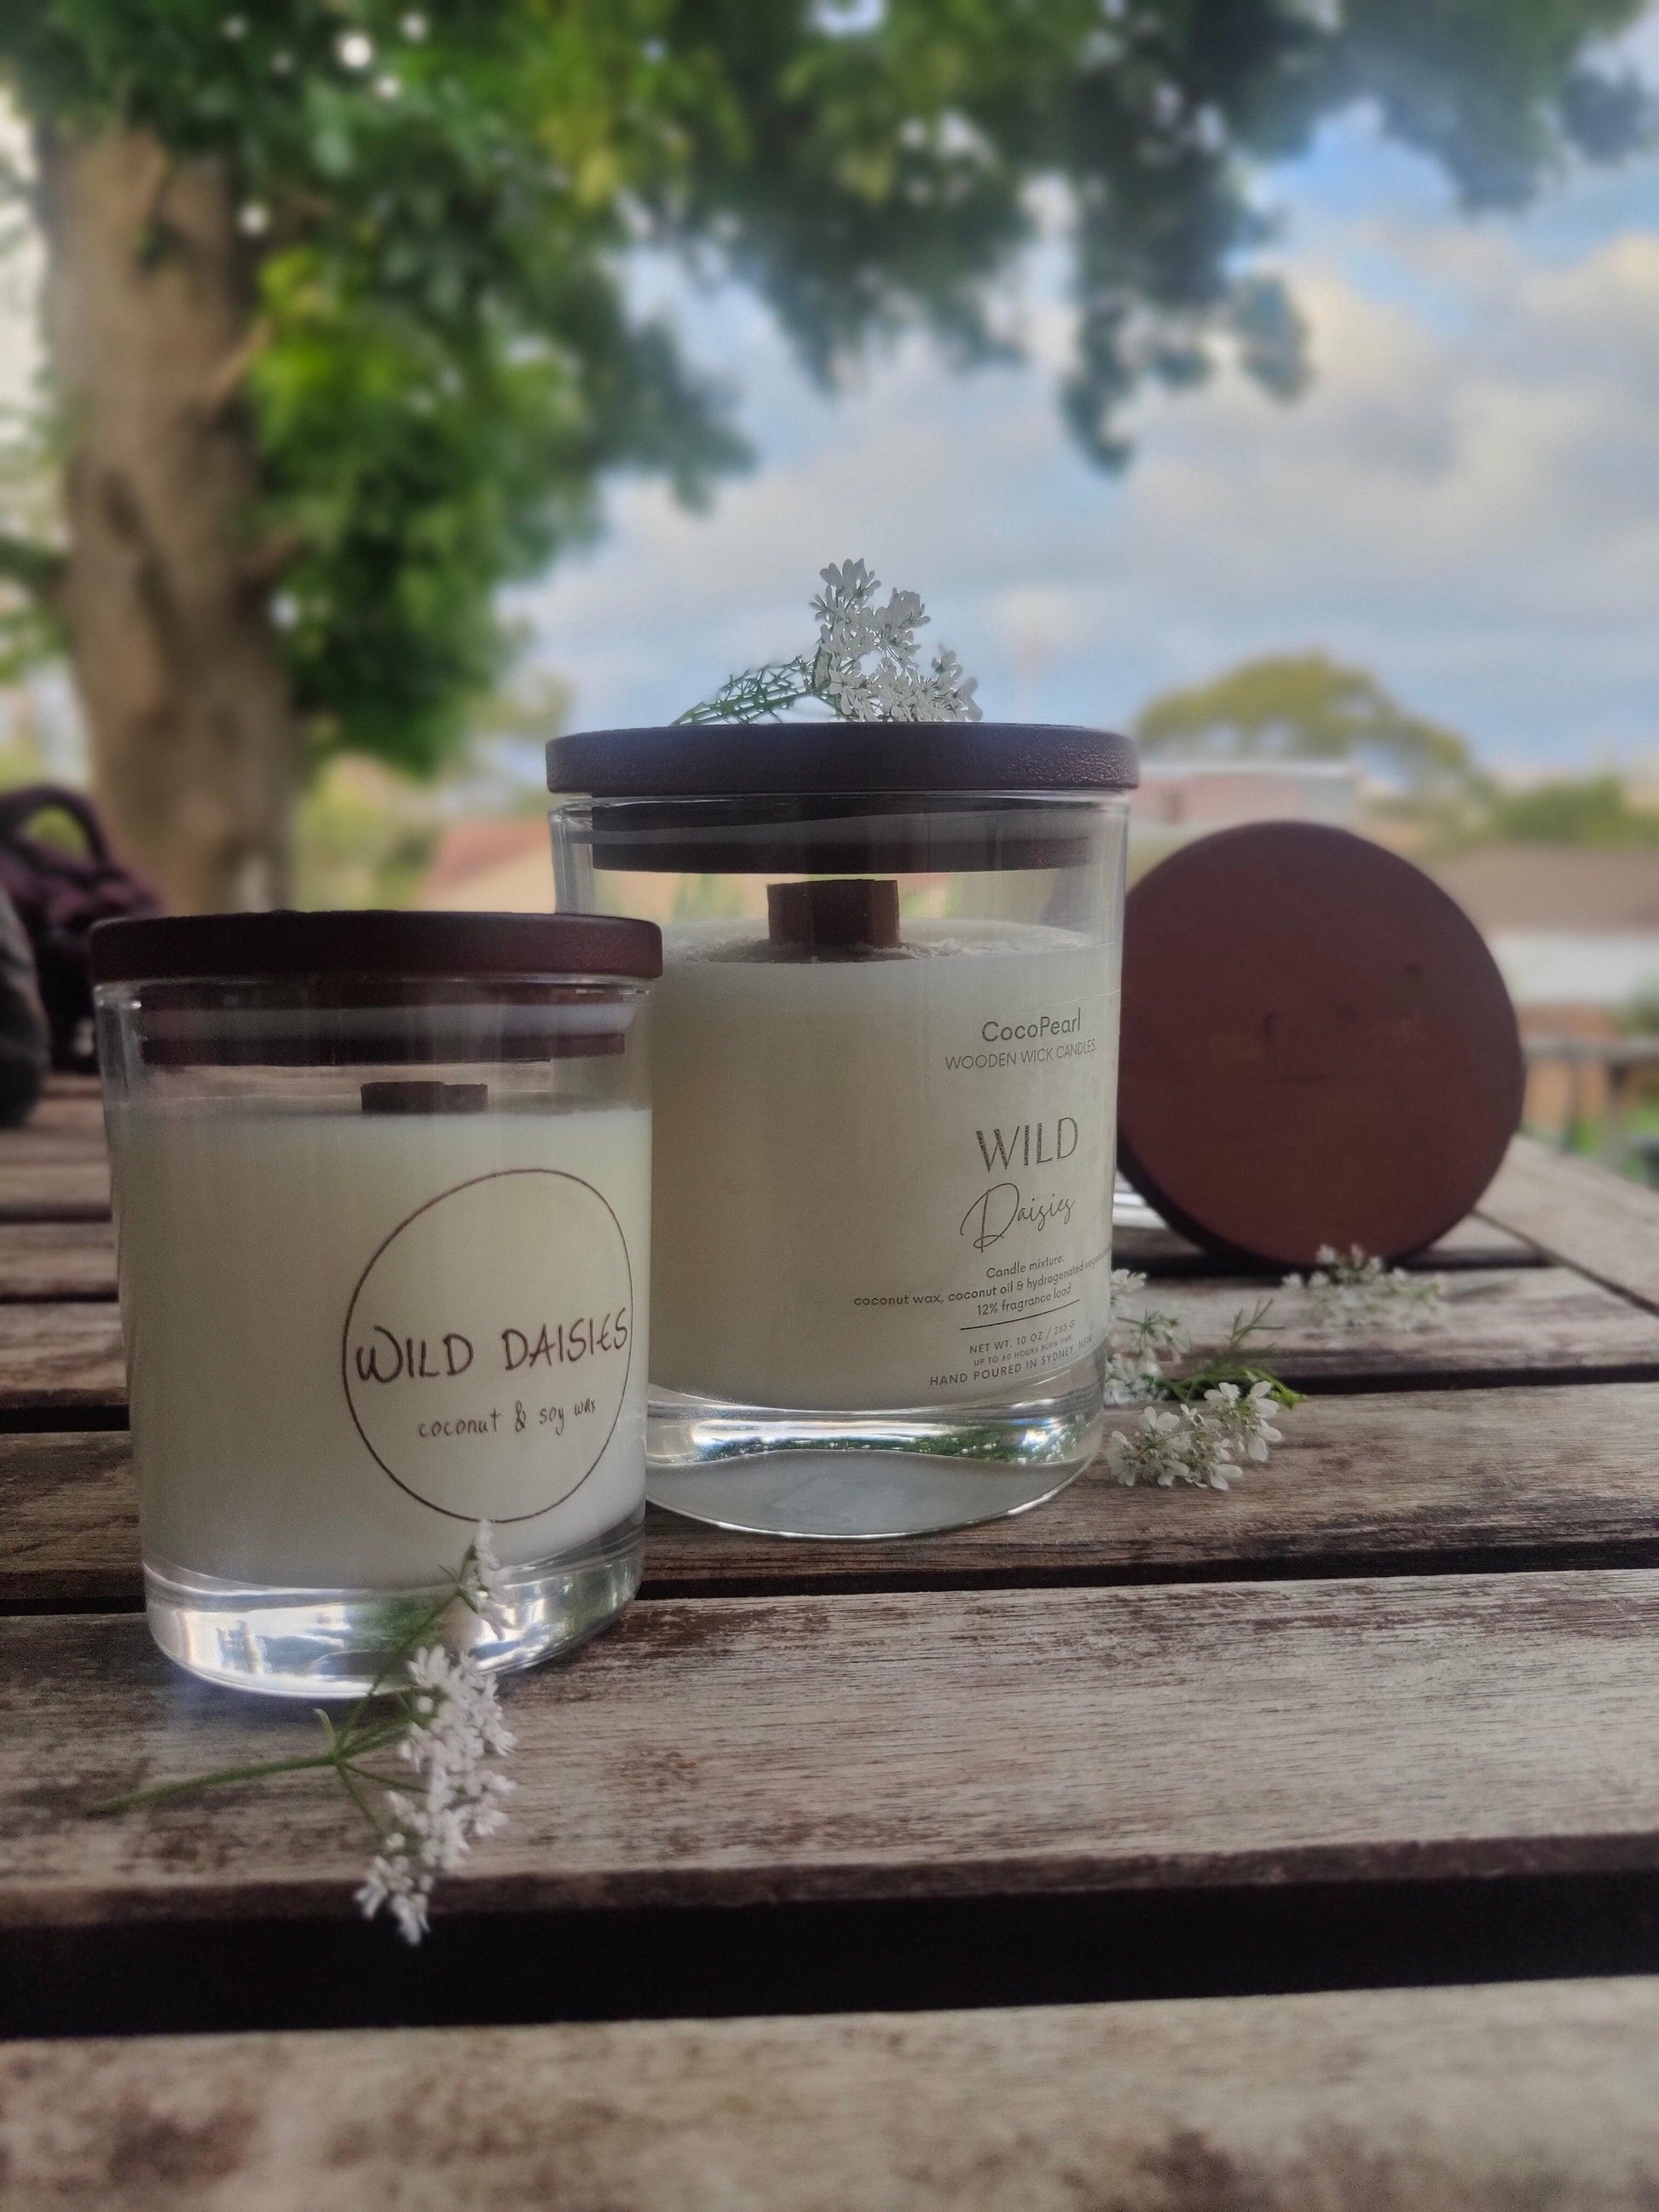 Wild Daisies | Wooden wick - CocoPearl Candles